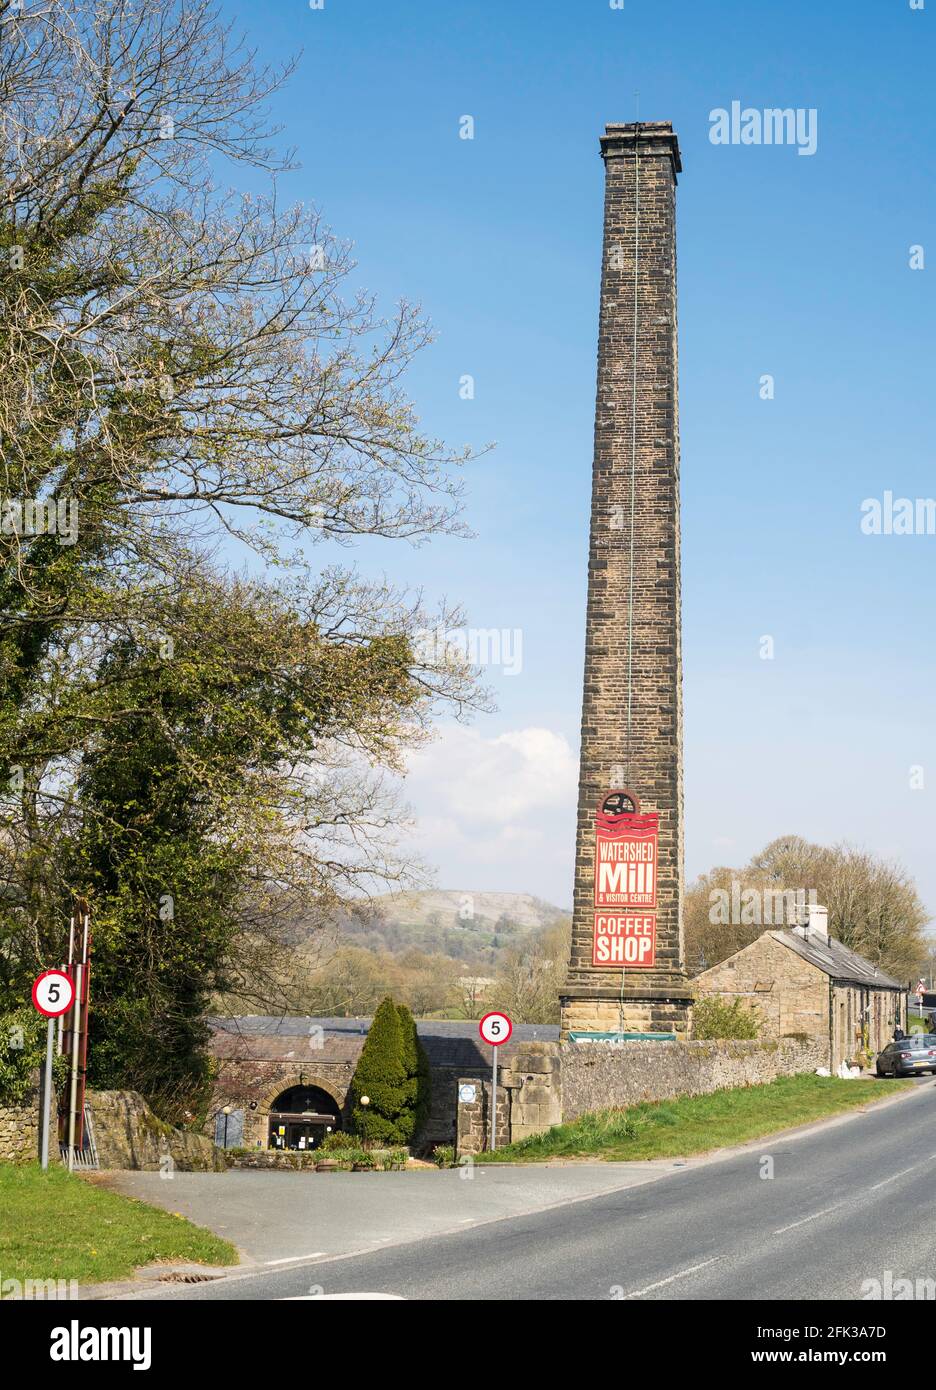 The old stone mill chimney of Watershed Mill in Settle, Yorkshire, England, UK - now a retail outlet and coffee shop. Stock Photo